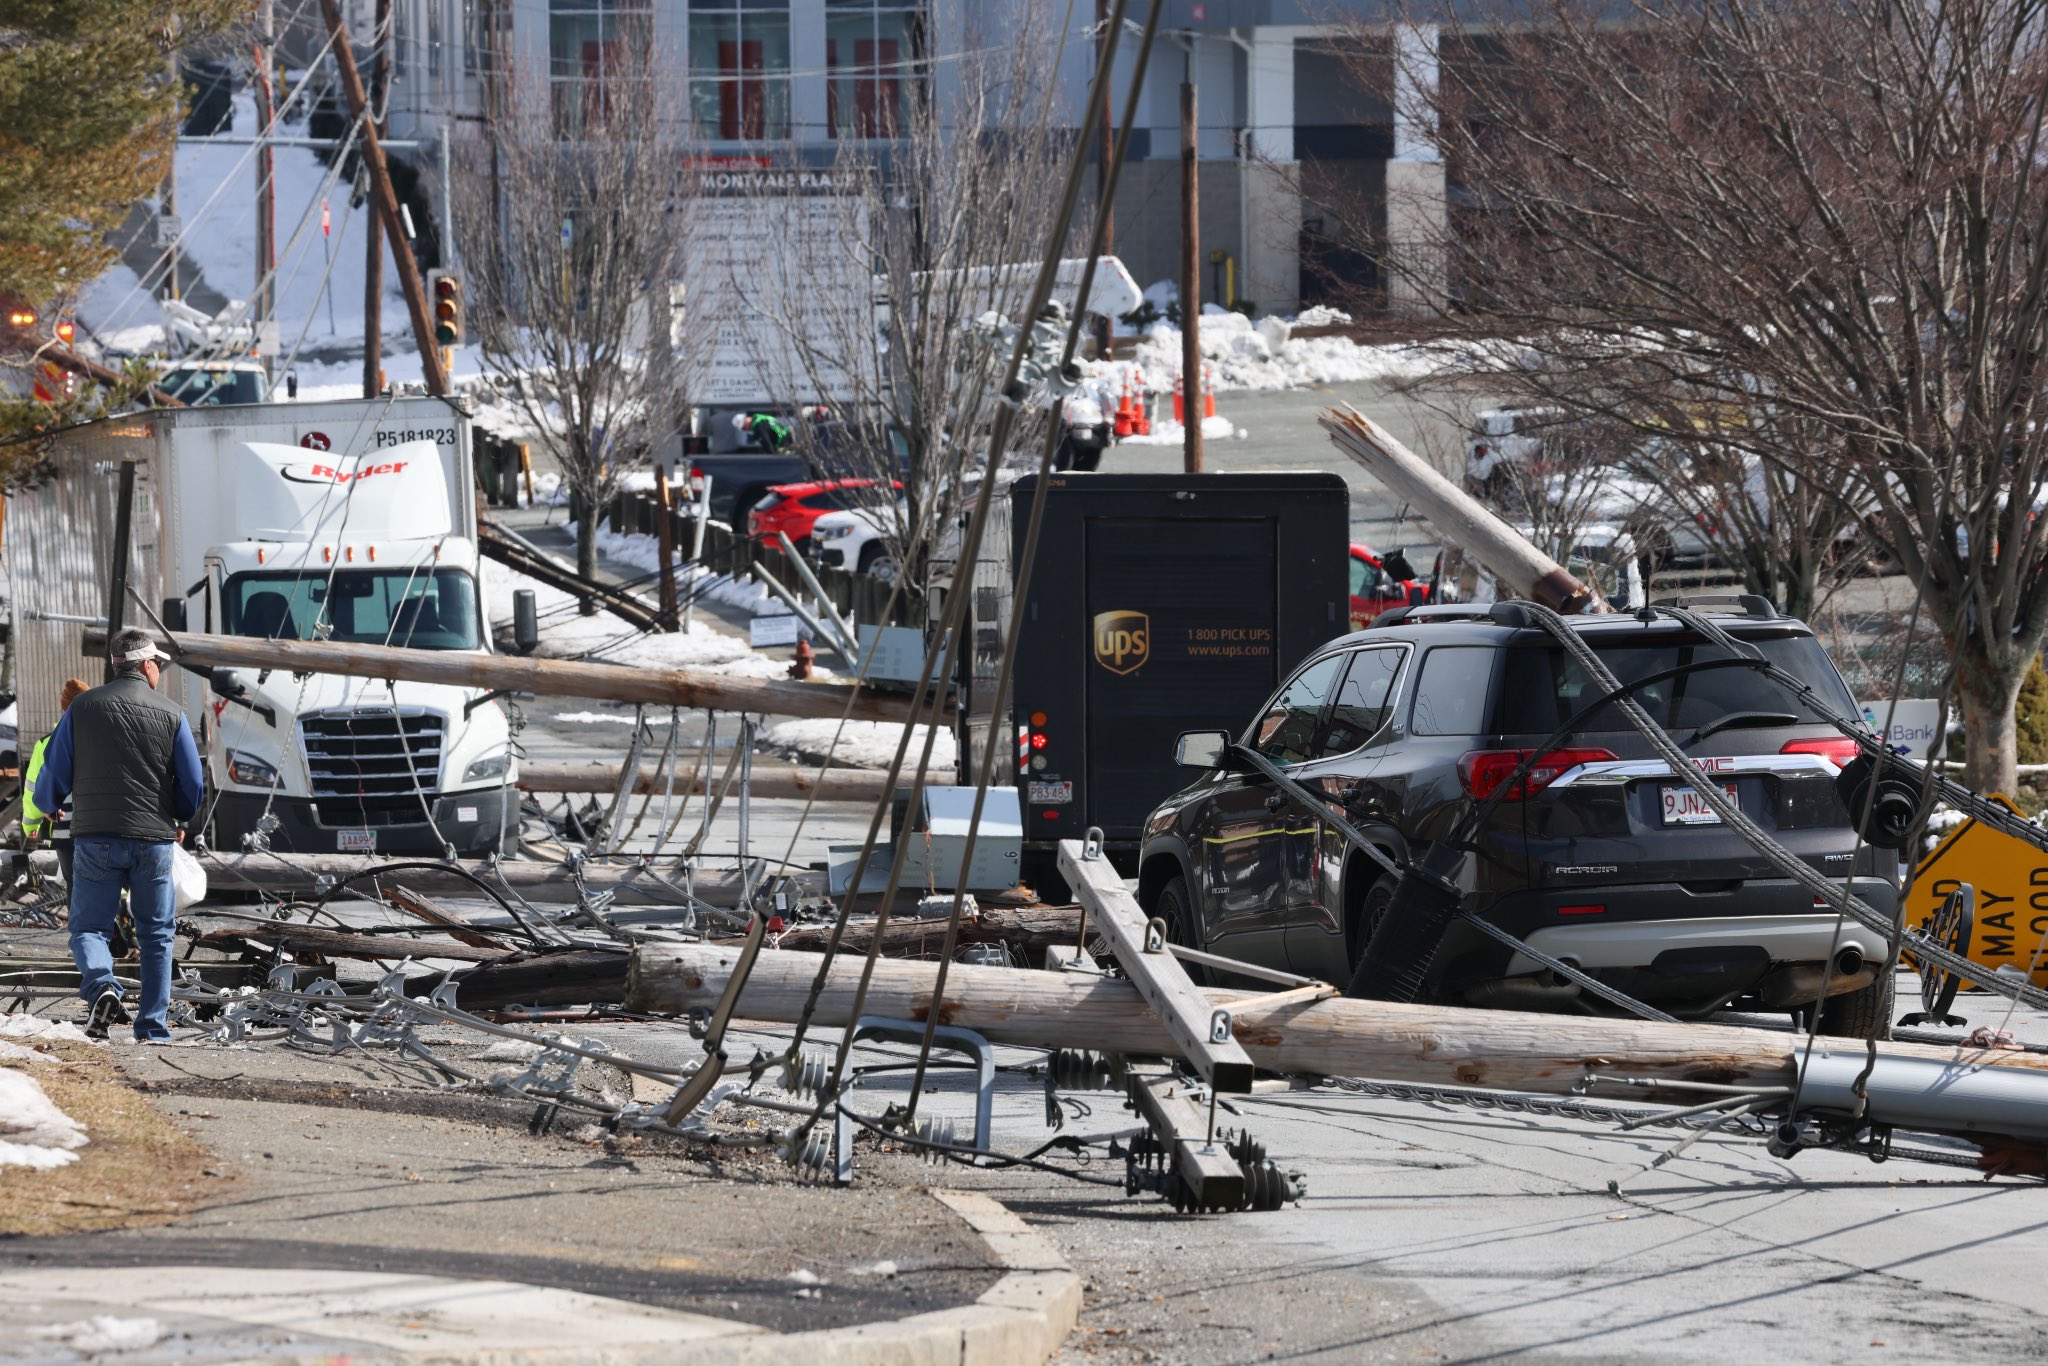 Seven utility poles carrying power liens fell along a street in Stoneham, Massachusetts, on Wednesday, March 1, 2023.